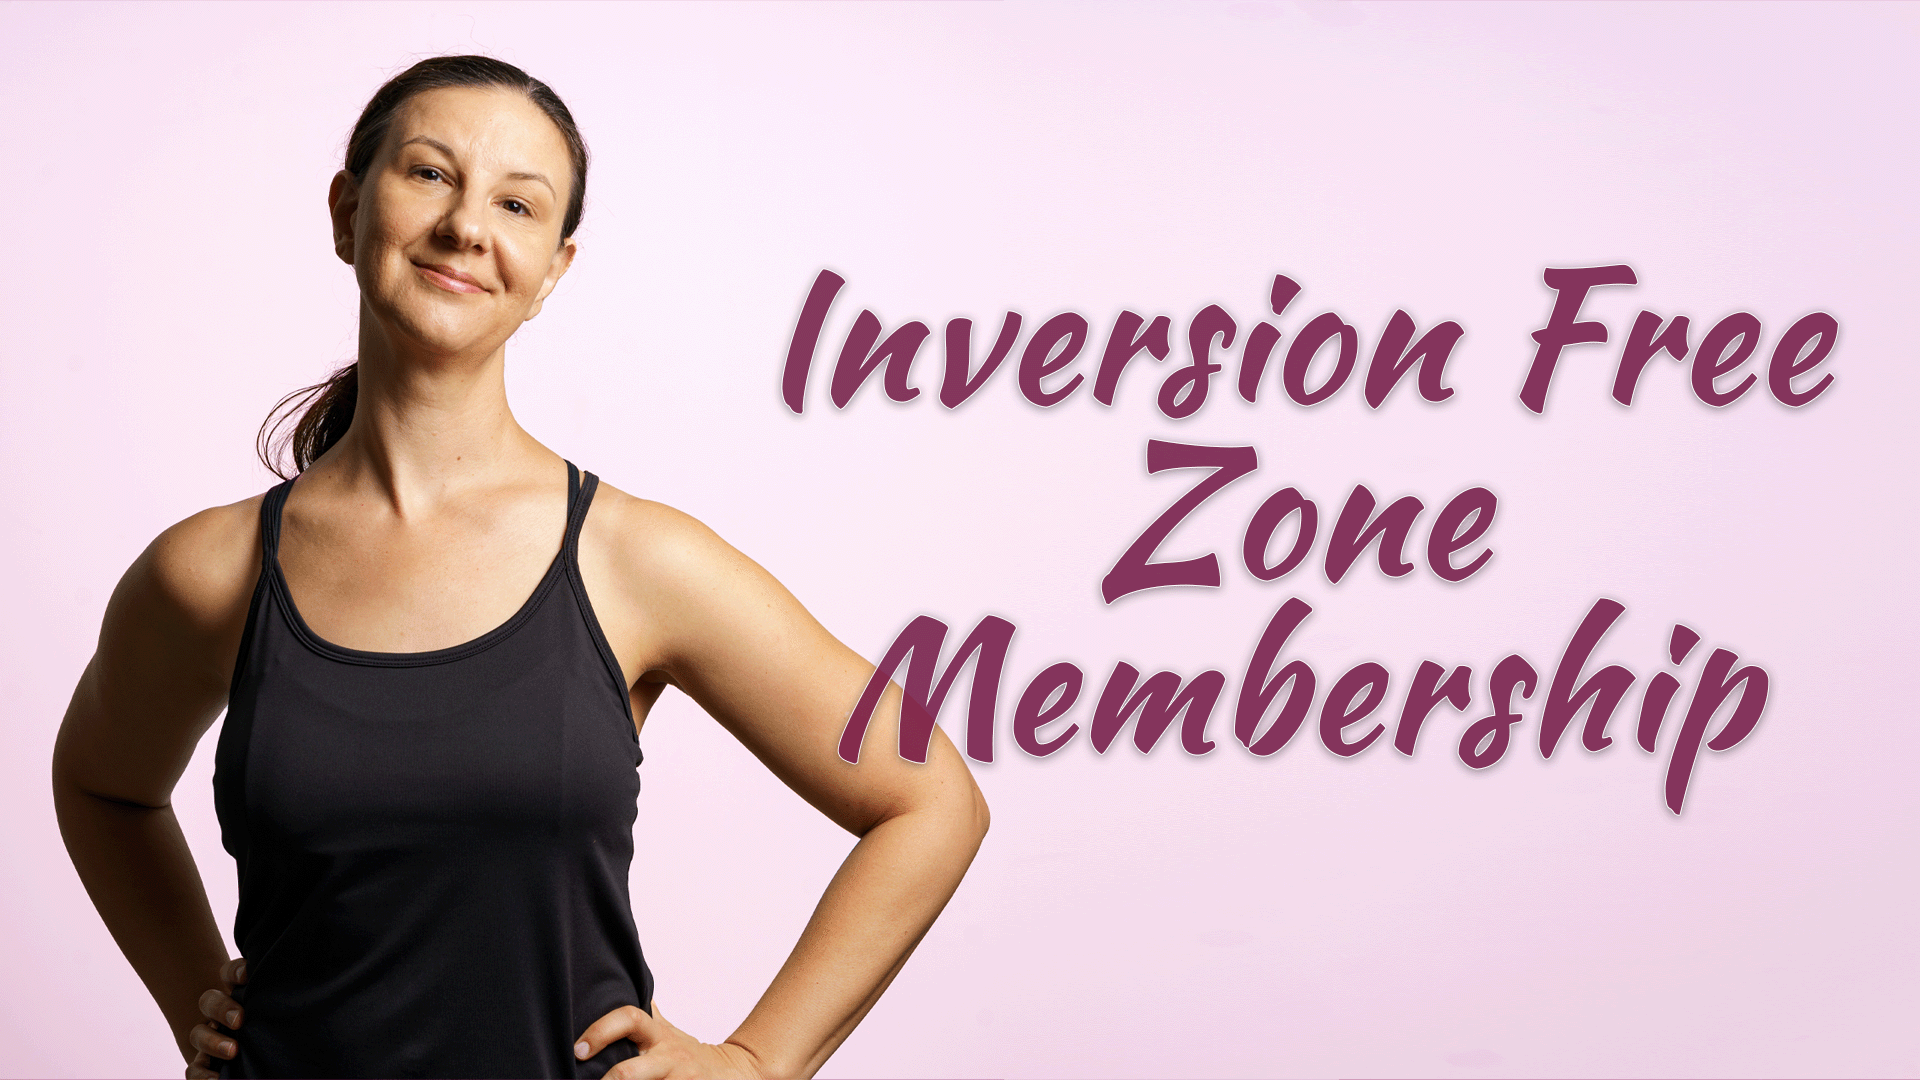 How to Be Inversion Free Course